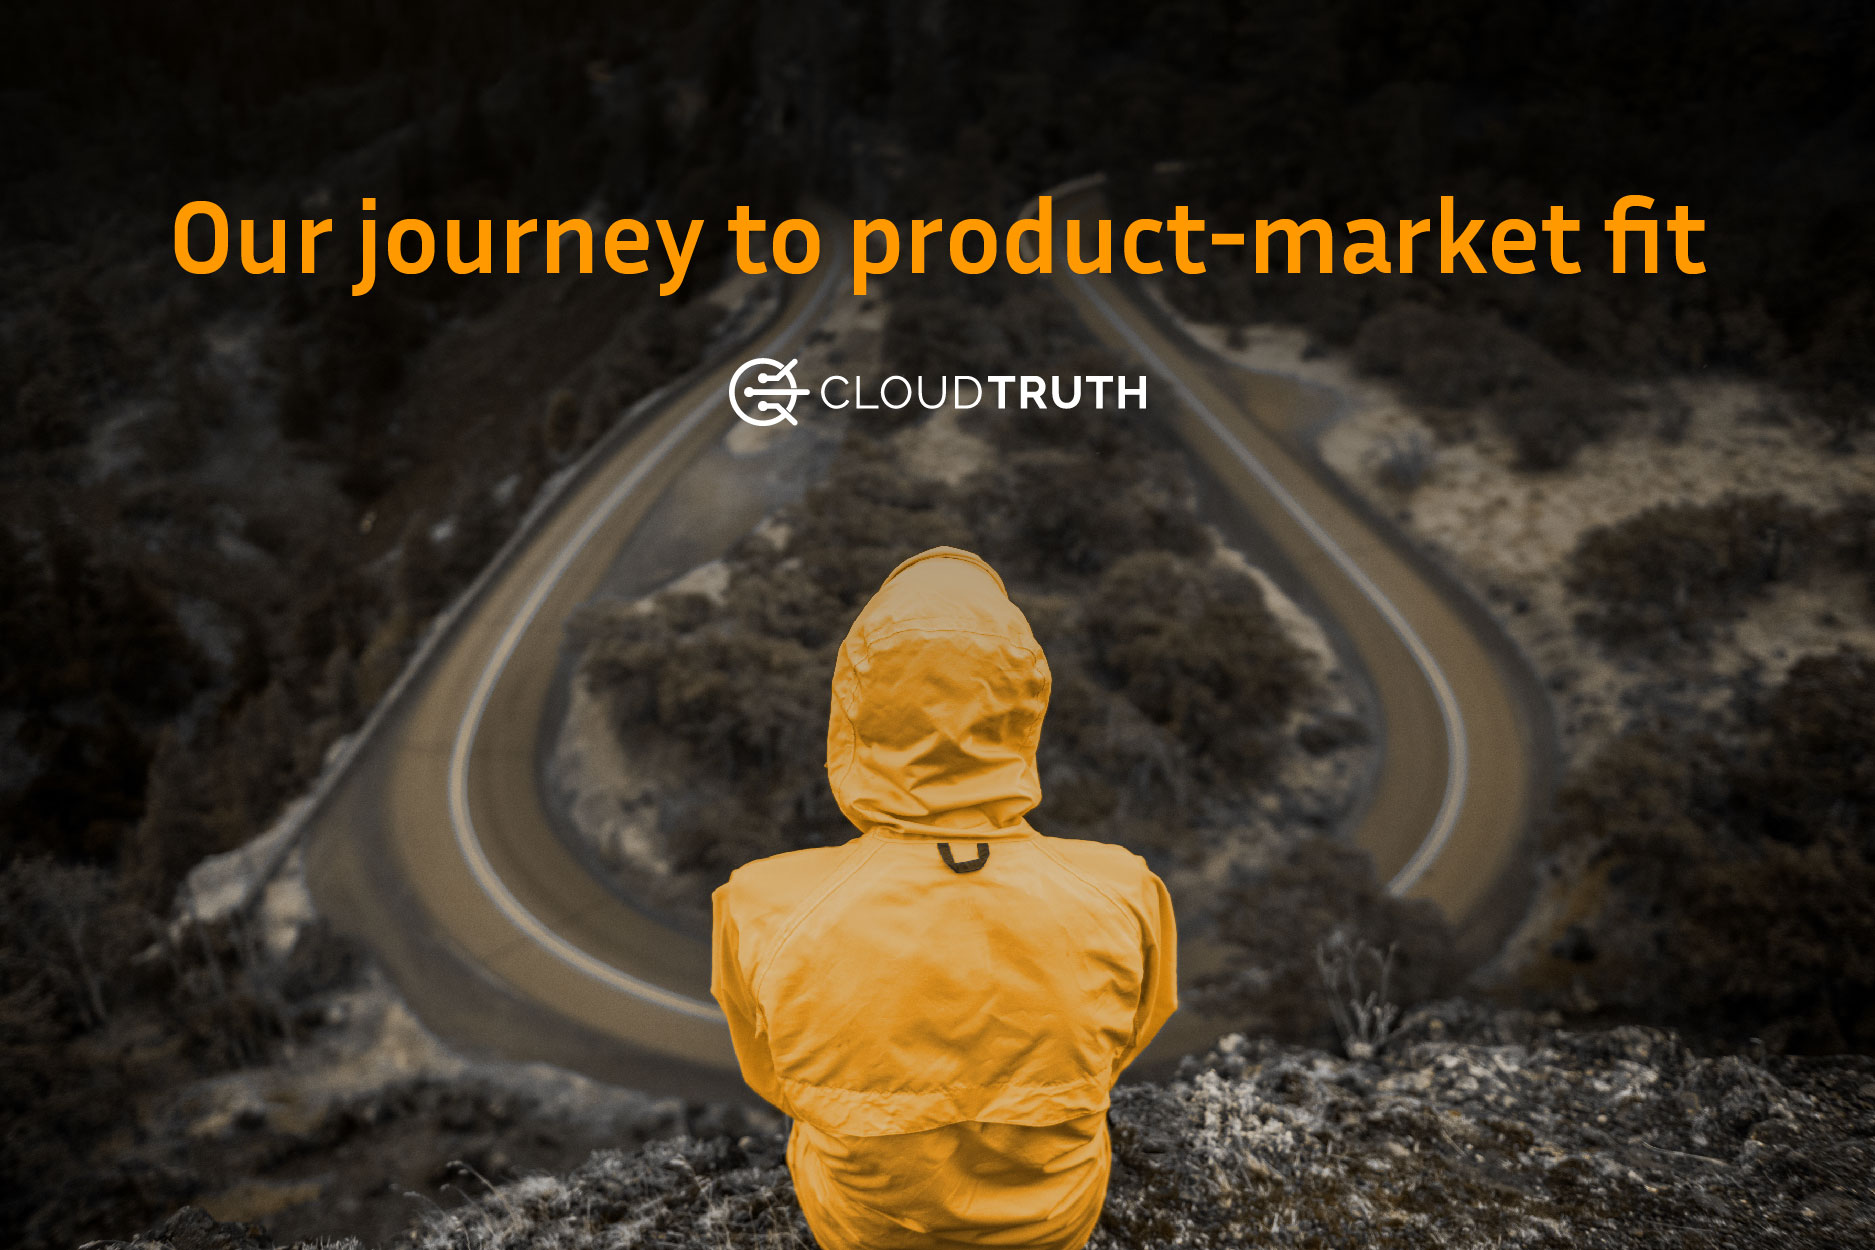 Our Journey to Product-Market Fit